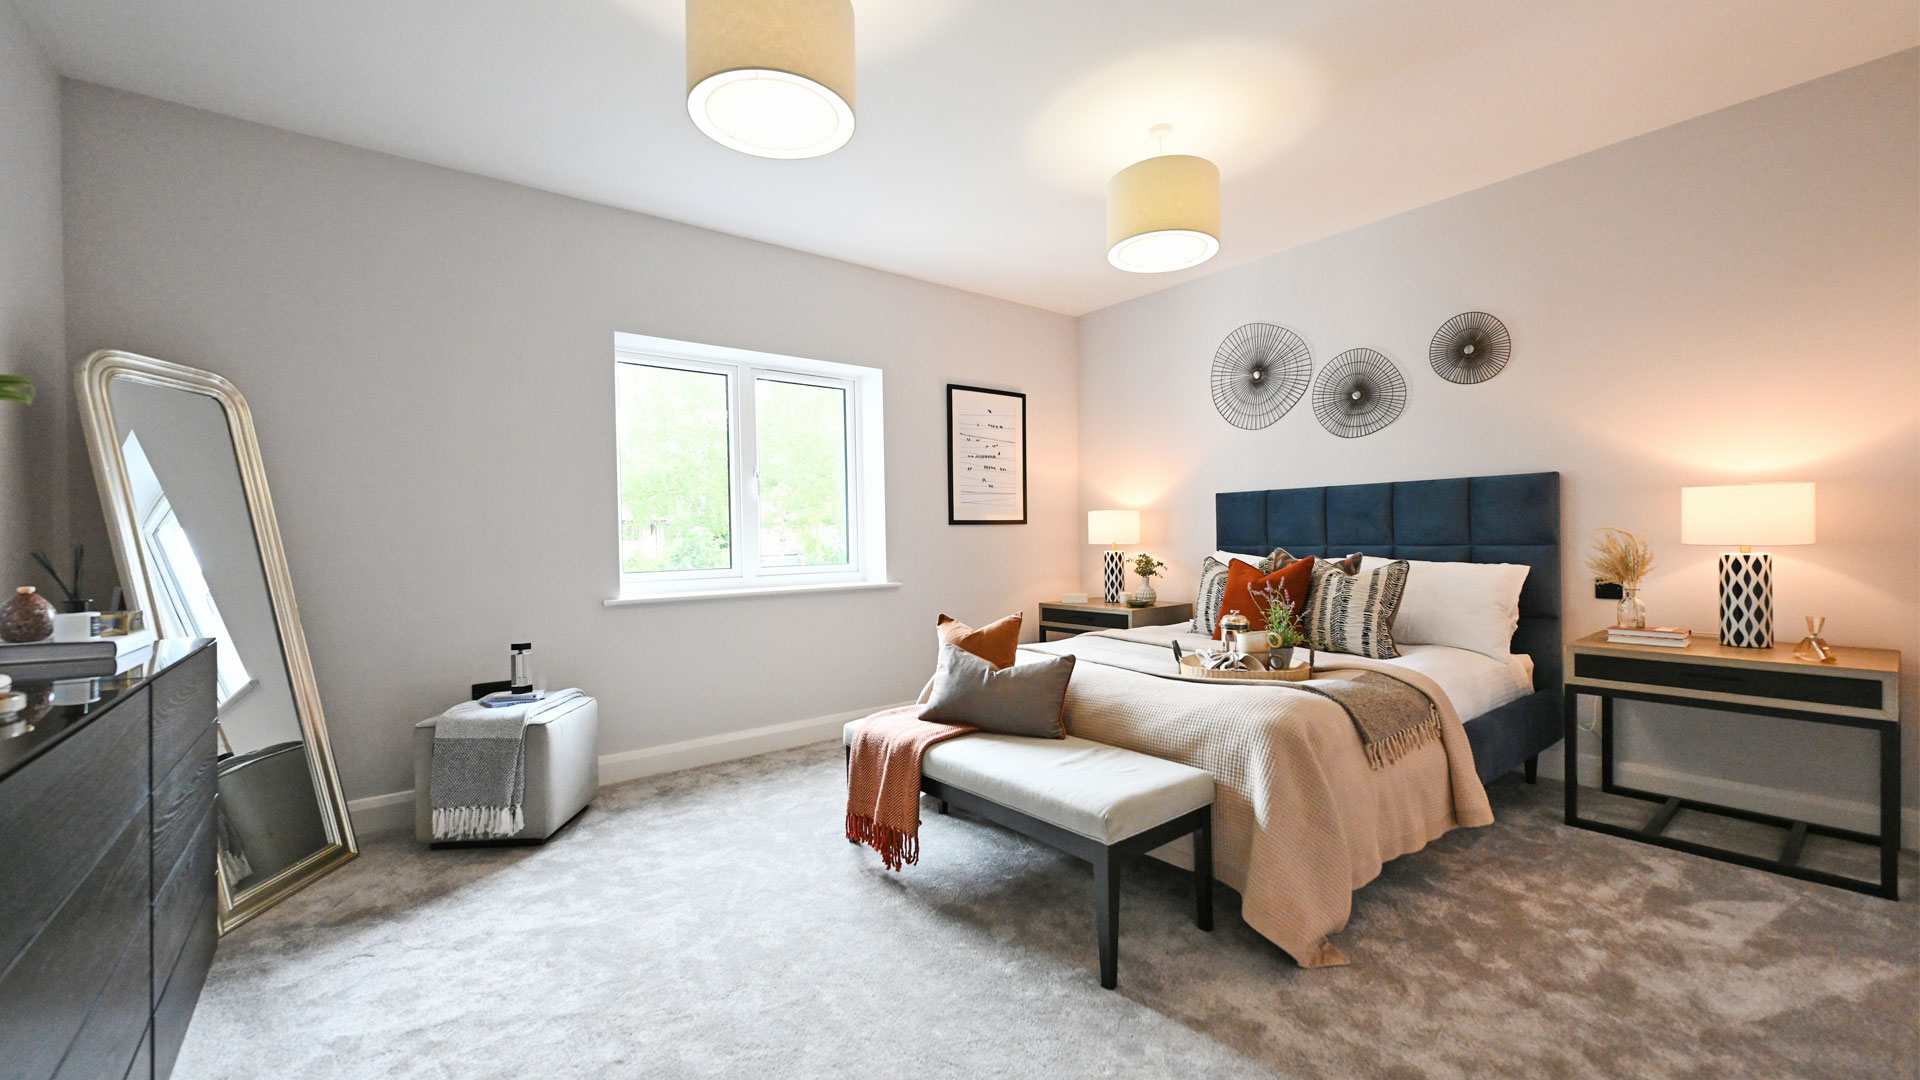 Kendrick Homes - new homes in the West Midlands, Cheltenham and Gloucester